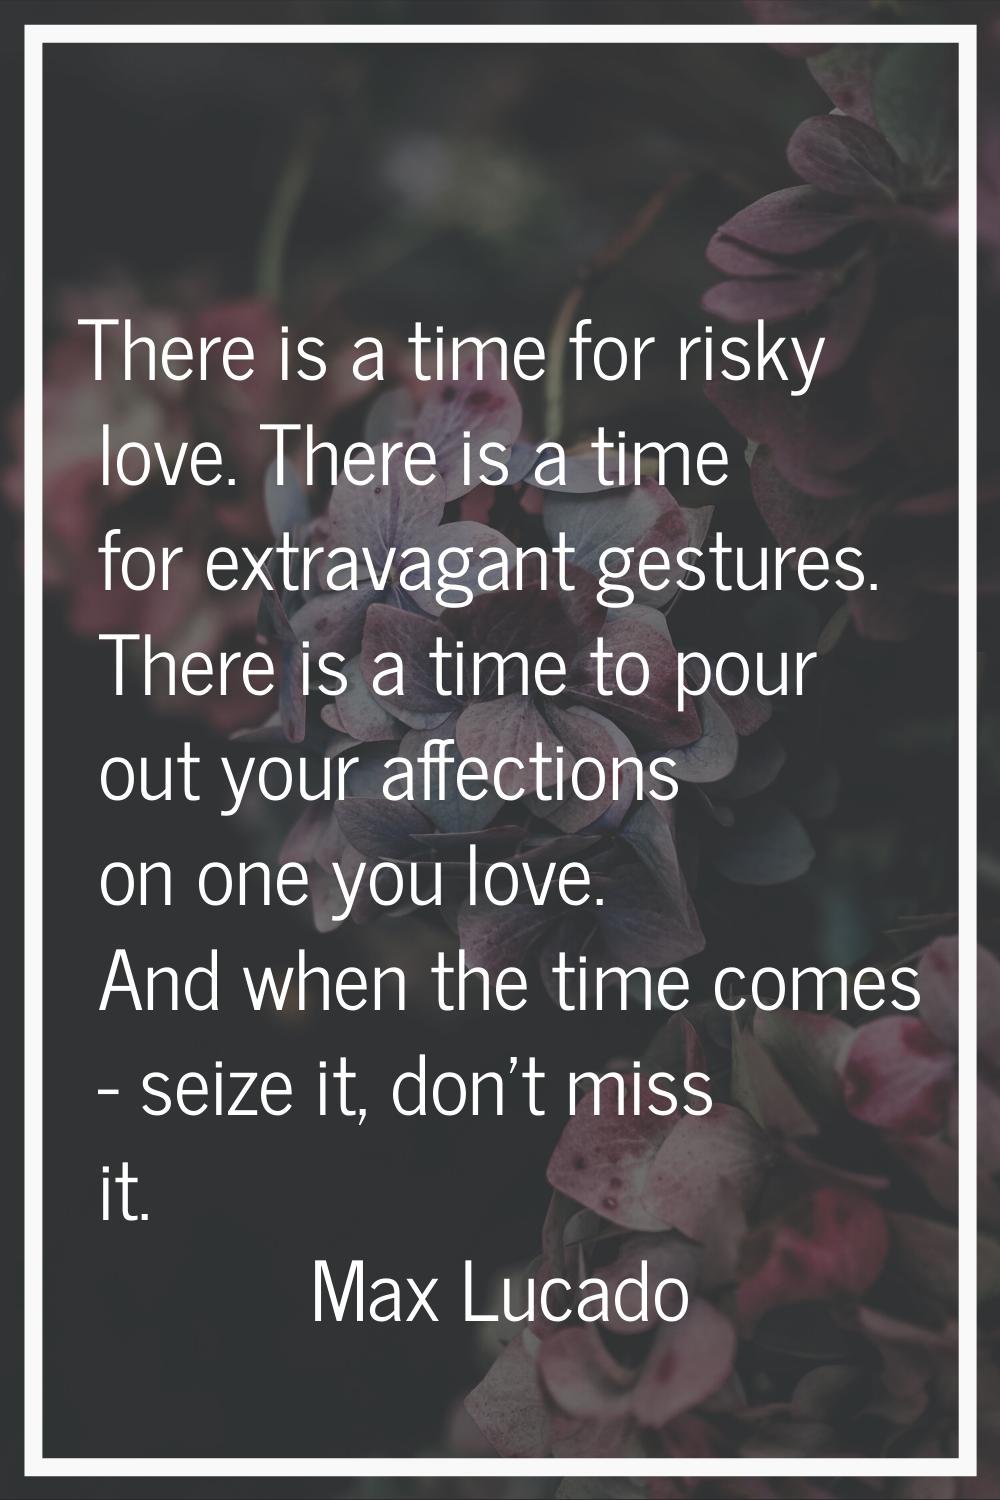 There is a time for risky love. There is a time for extravagant gestures. There is a time to pour o